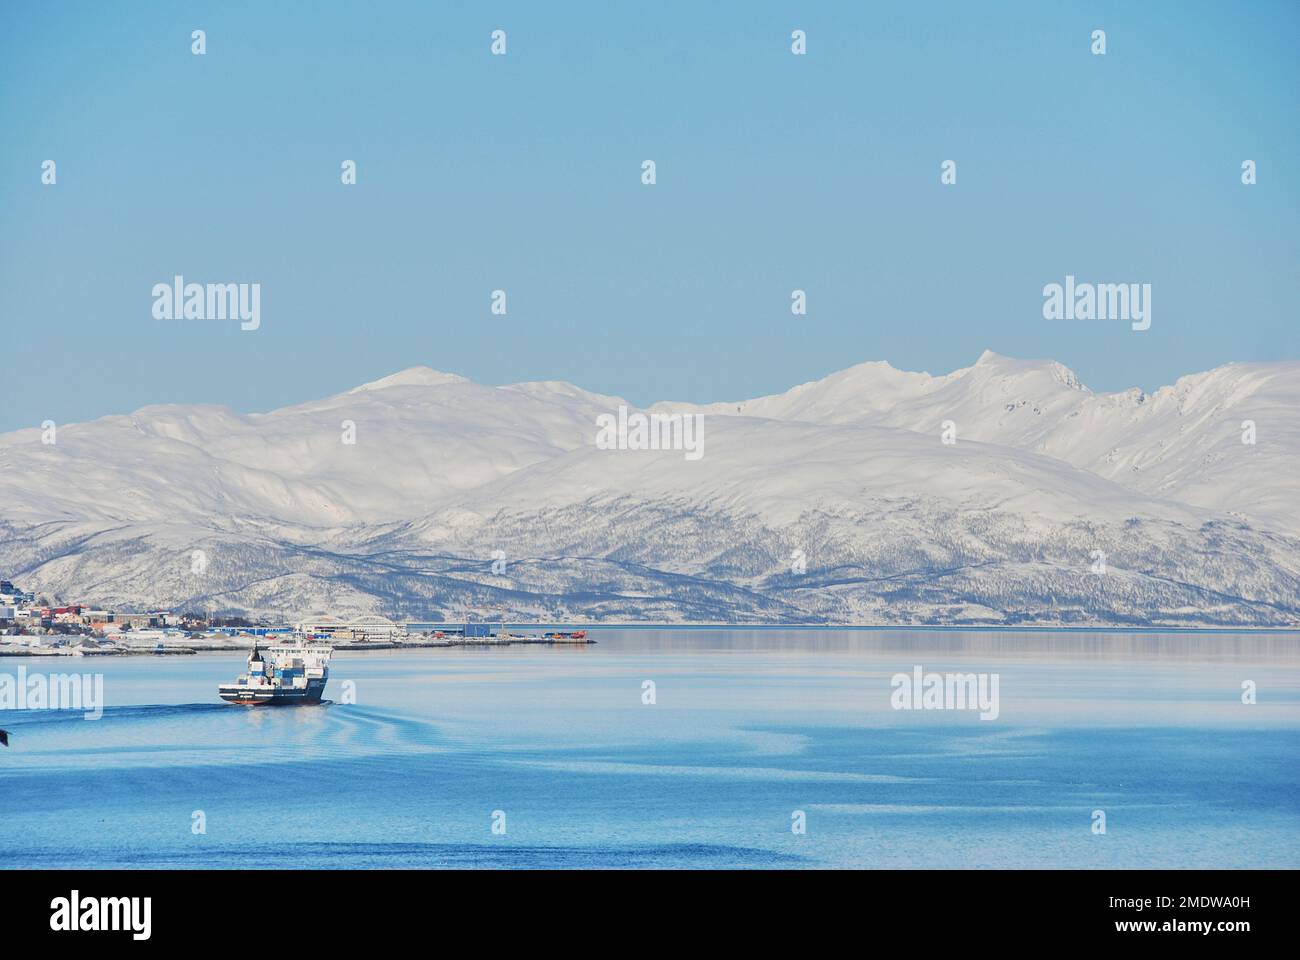 fishing boat in the winter landscape of the port of Tromso in a fjord at the coastline of northern Norway with snow covered mountains in the backgroun Stock Photo